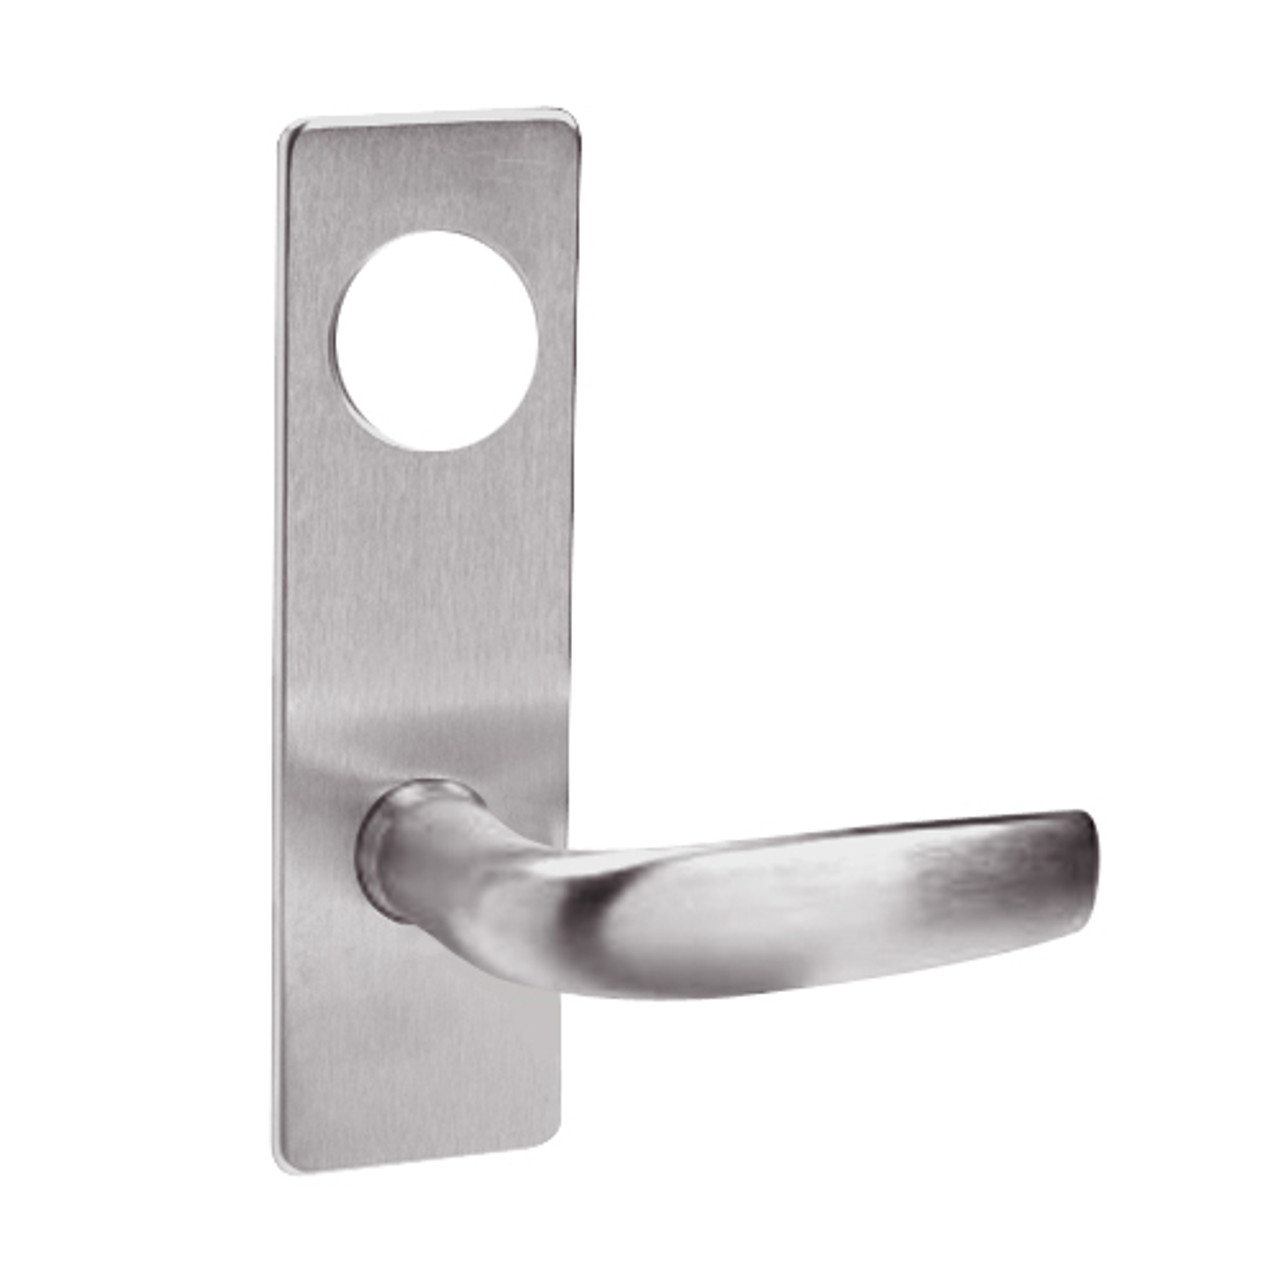 ML2051-CSN-630-LC Corbin Russwin ML2000 Series Mortise Office Locksets with Citation Lever in Satin Stainless